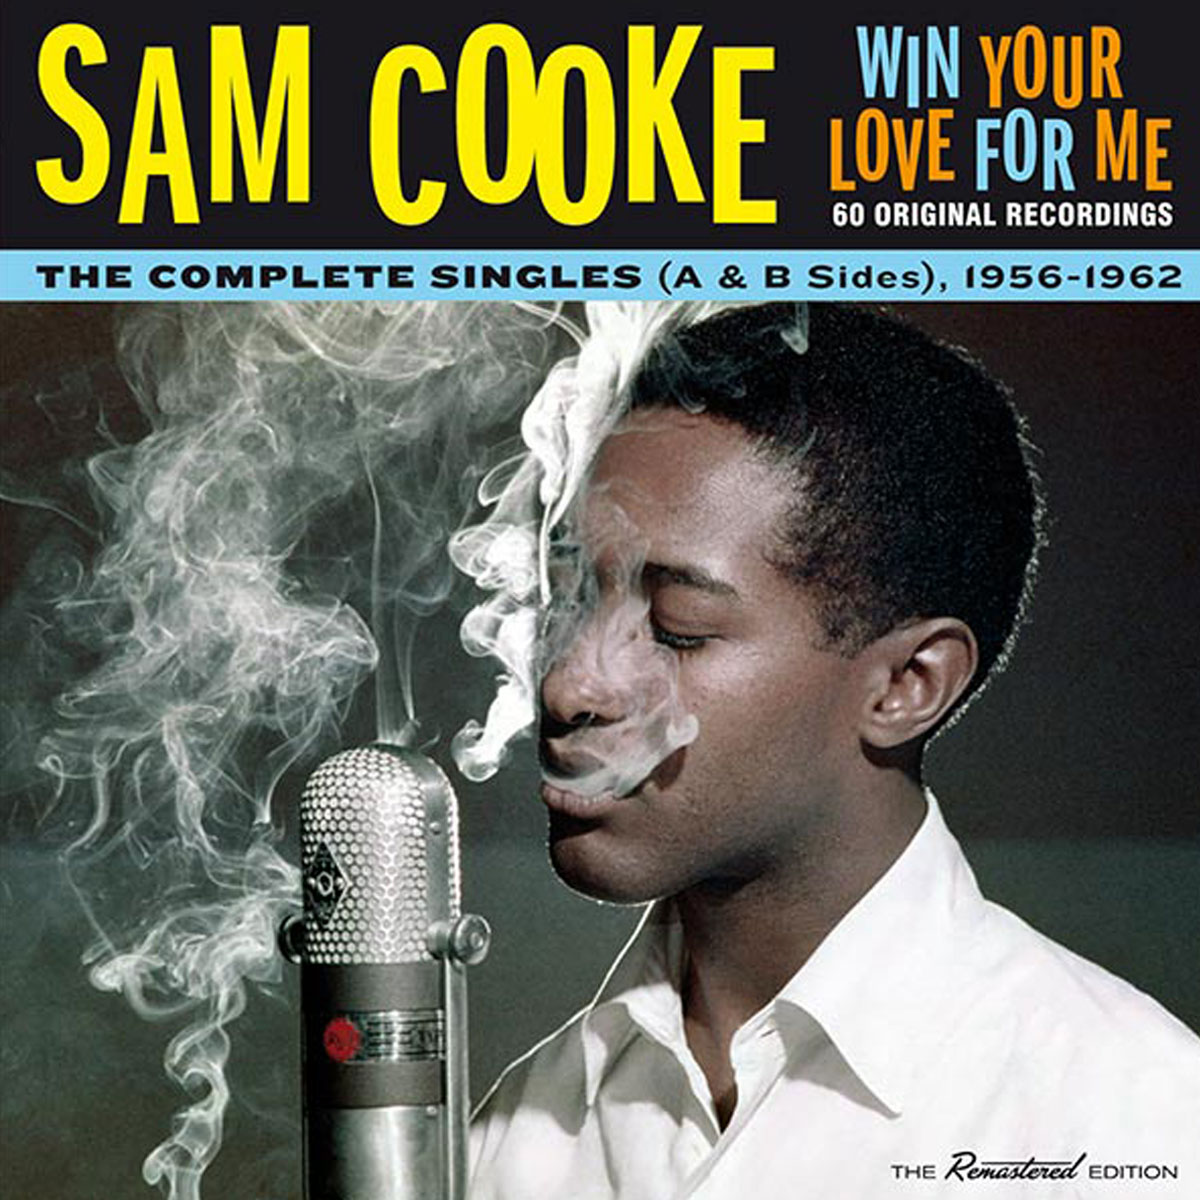 Win Your Love For Me - Complete Singles 1956-62 A & B Sides